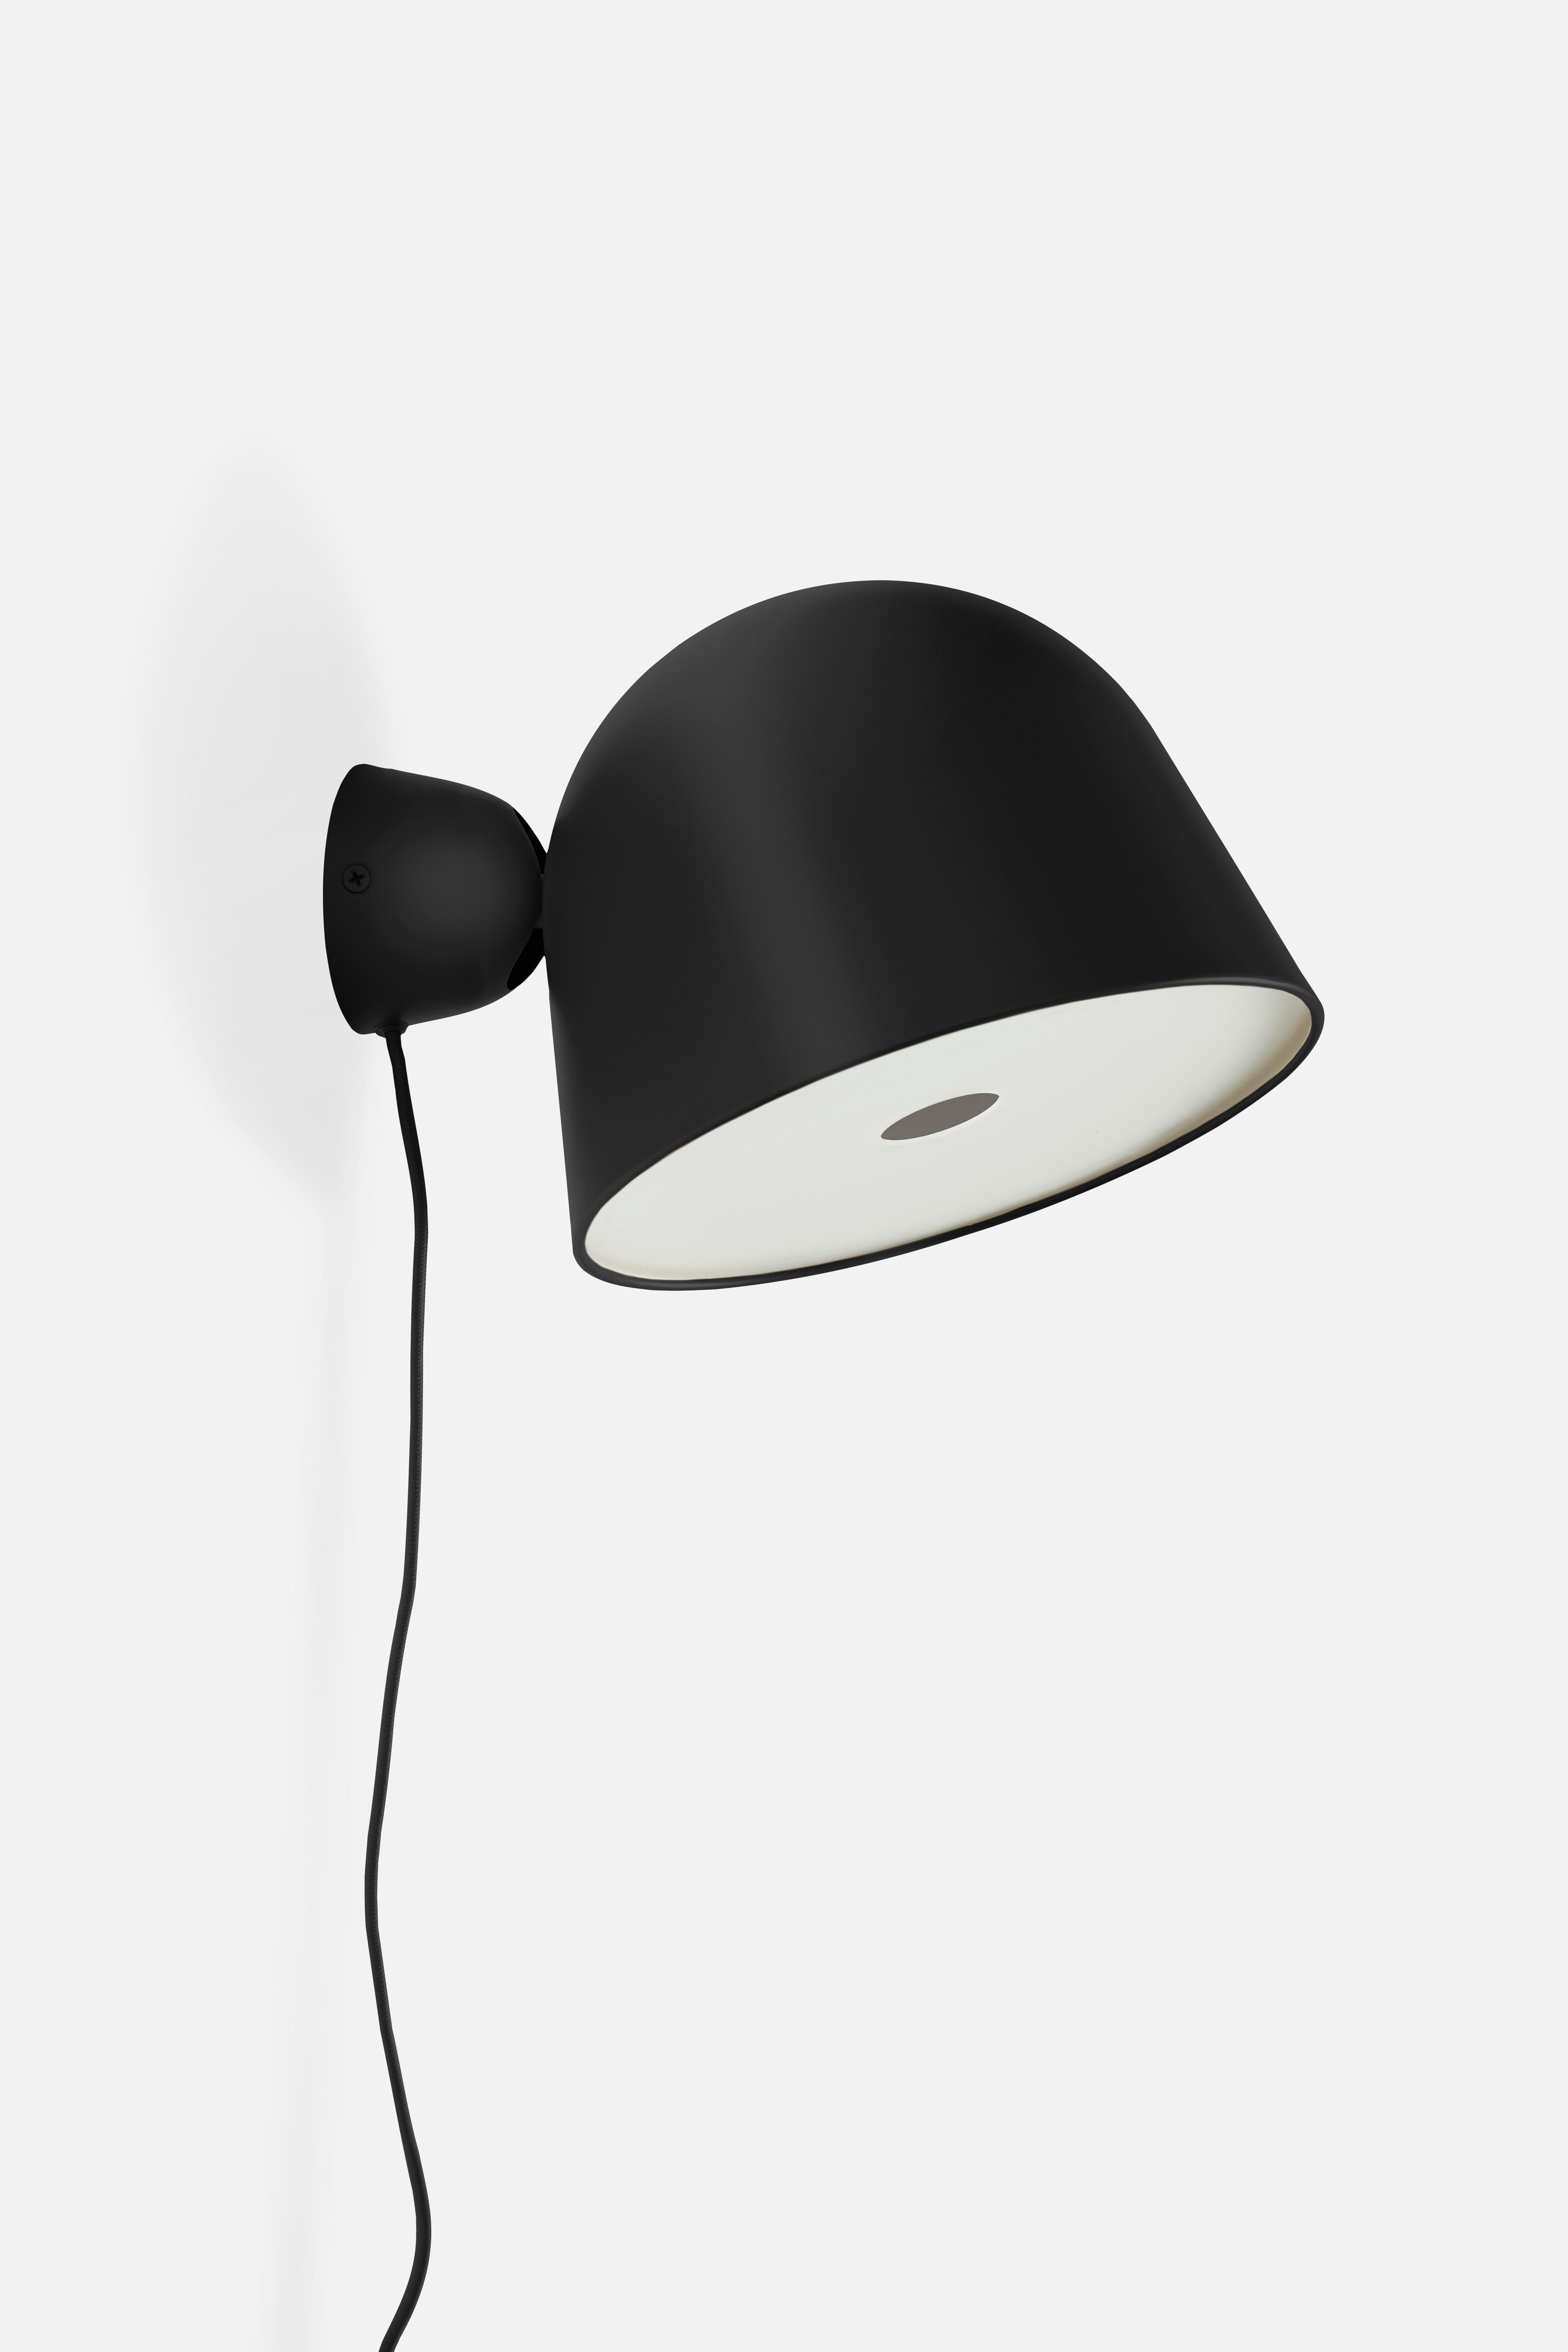 Black Kuppi wall lamp by Mika Tolvanen.
Materials: metal.
Dimensions: D 24 x H 16.5 cm.
Available in black or mustard yellow.

Mika Tolvanen is a renowned Finnish designer. After graduating from The Royal College
of Art, London, he established